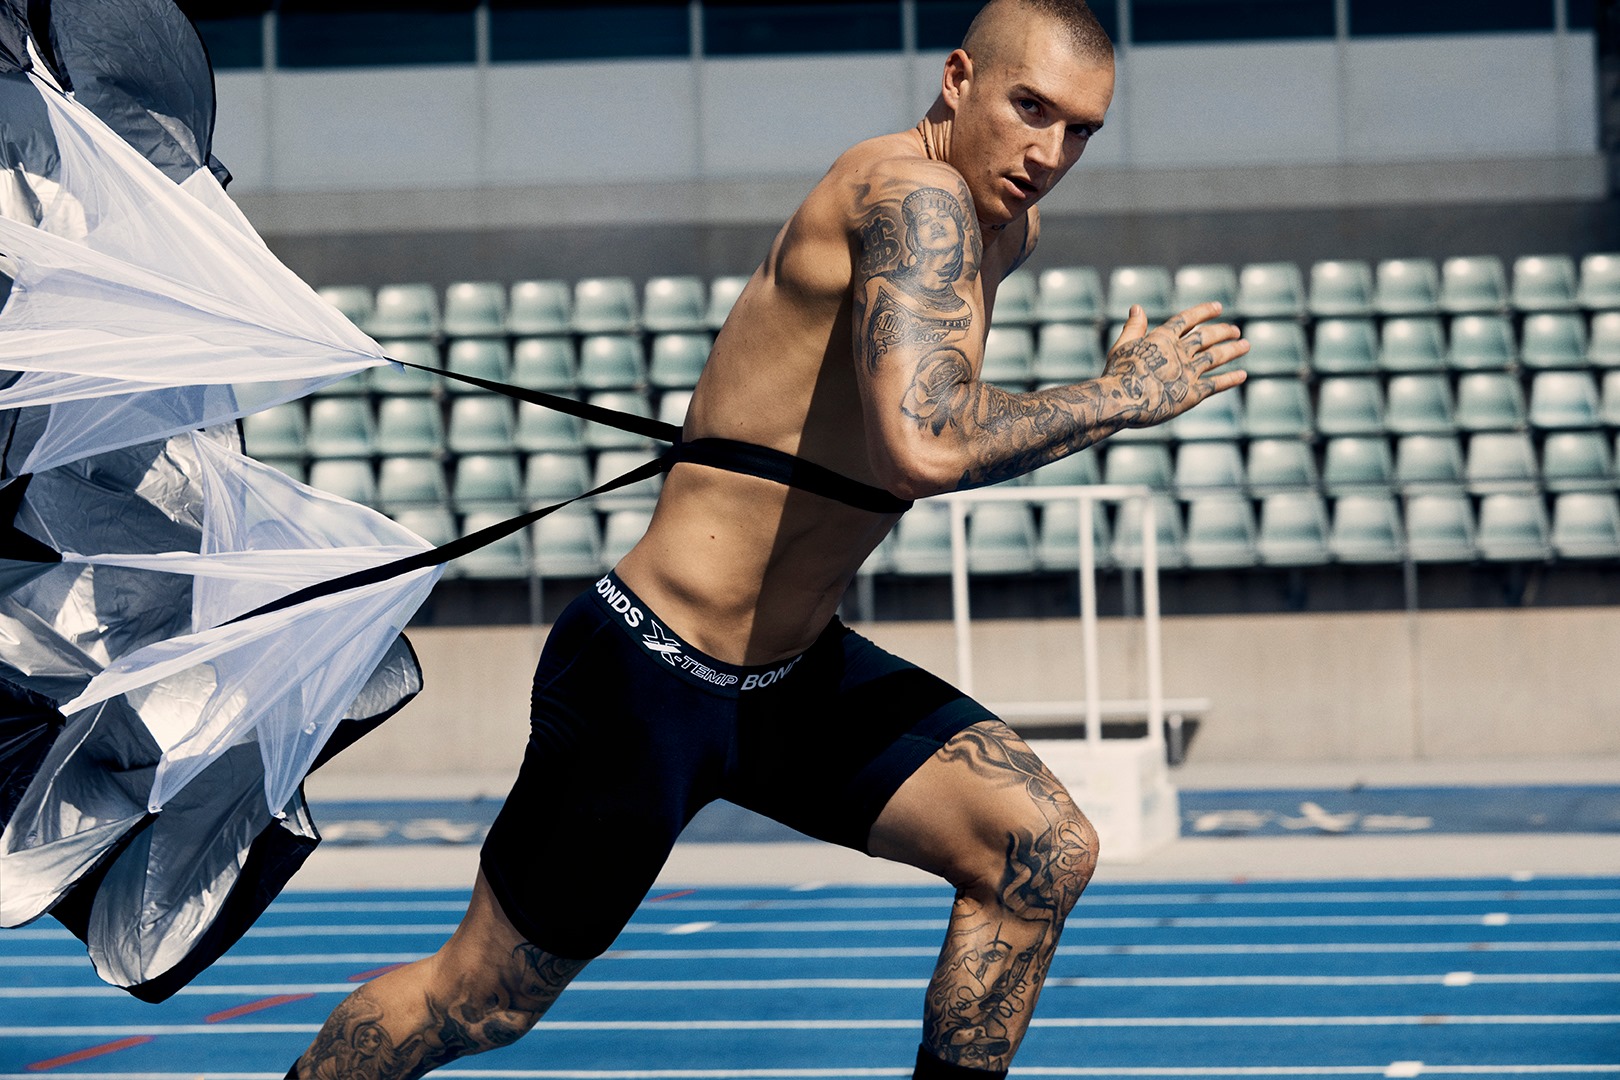 Get ready for Dustin Martin to appear on a billboard near you, draped in luxury watches…